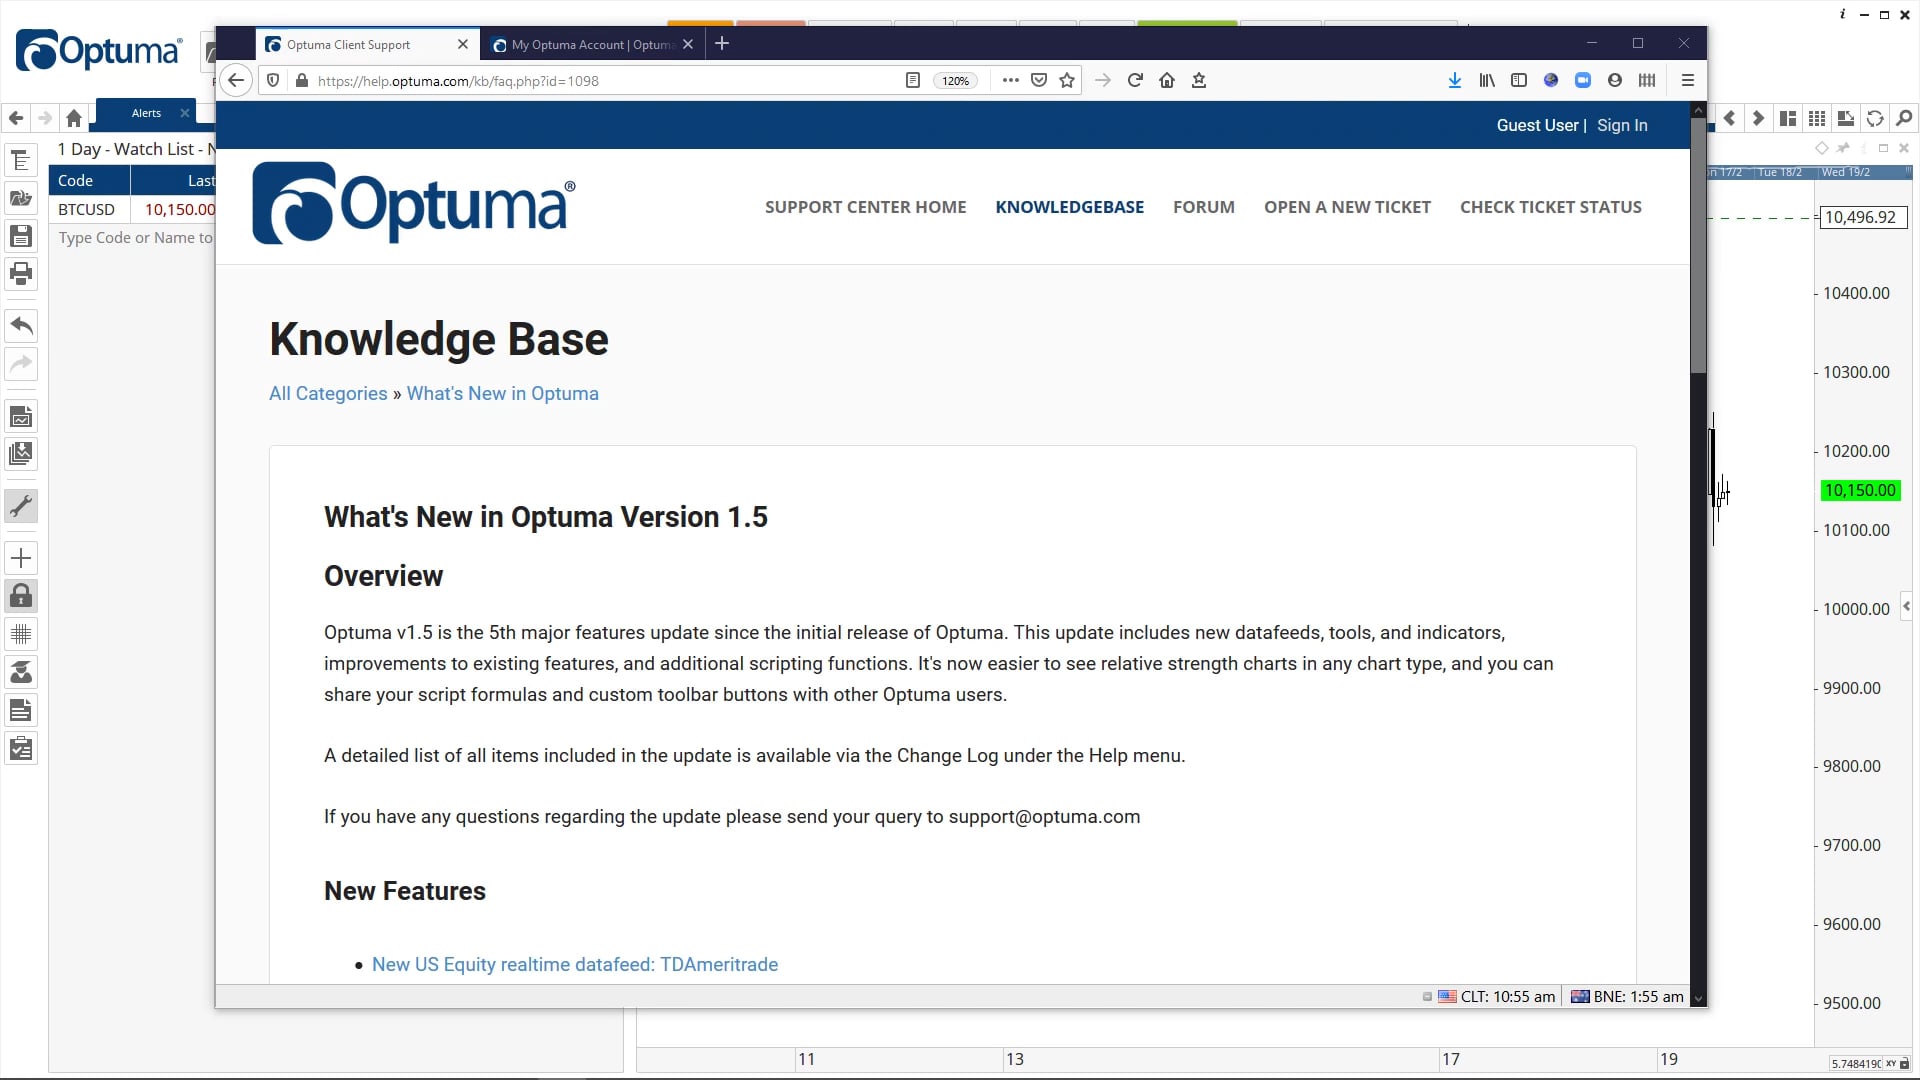 What’s New in Optuma 1.5